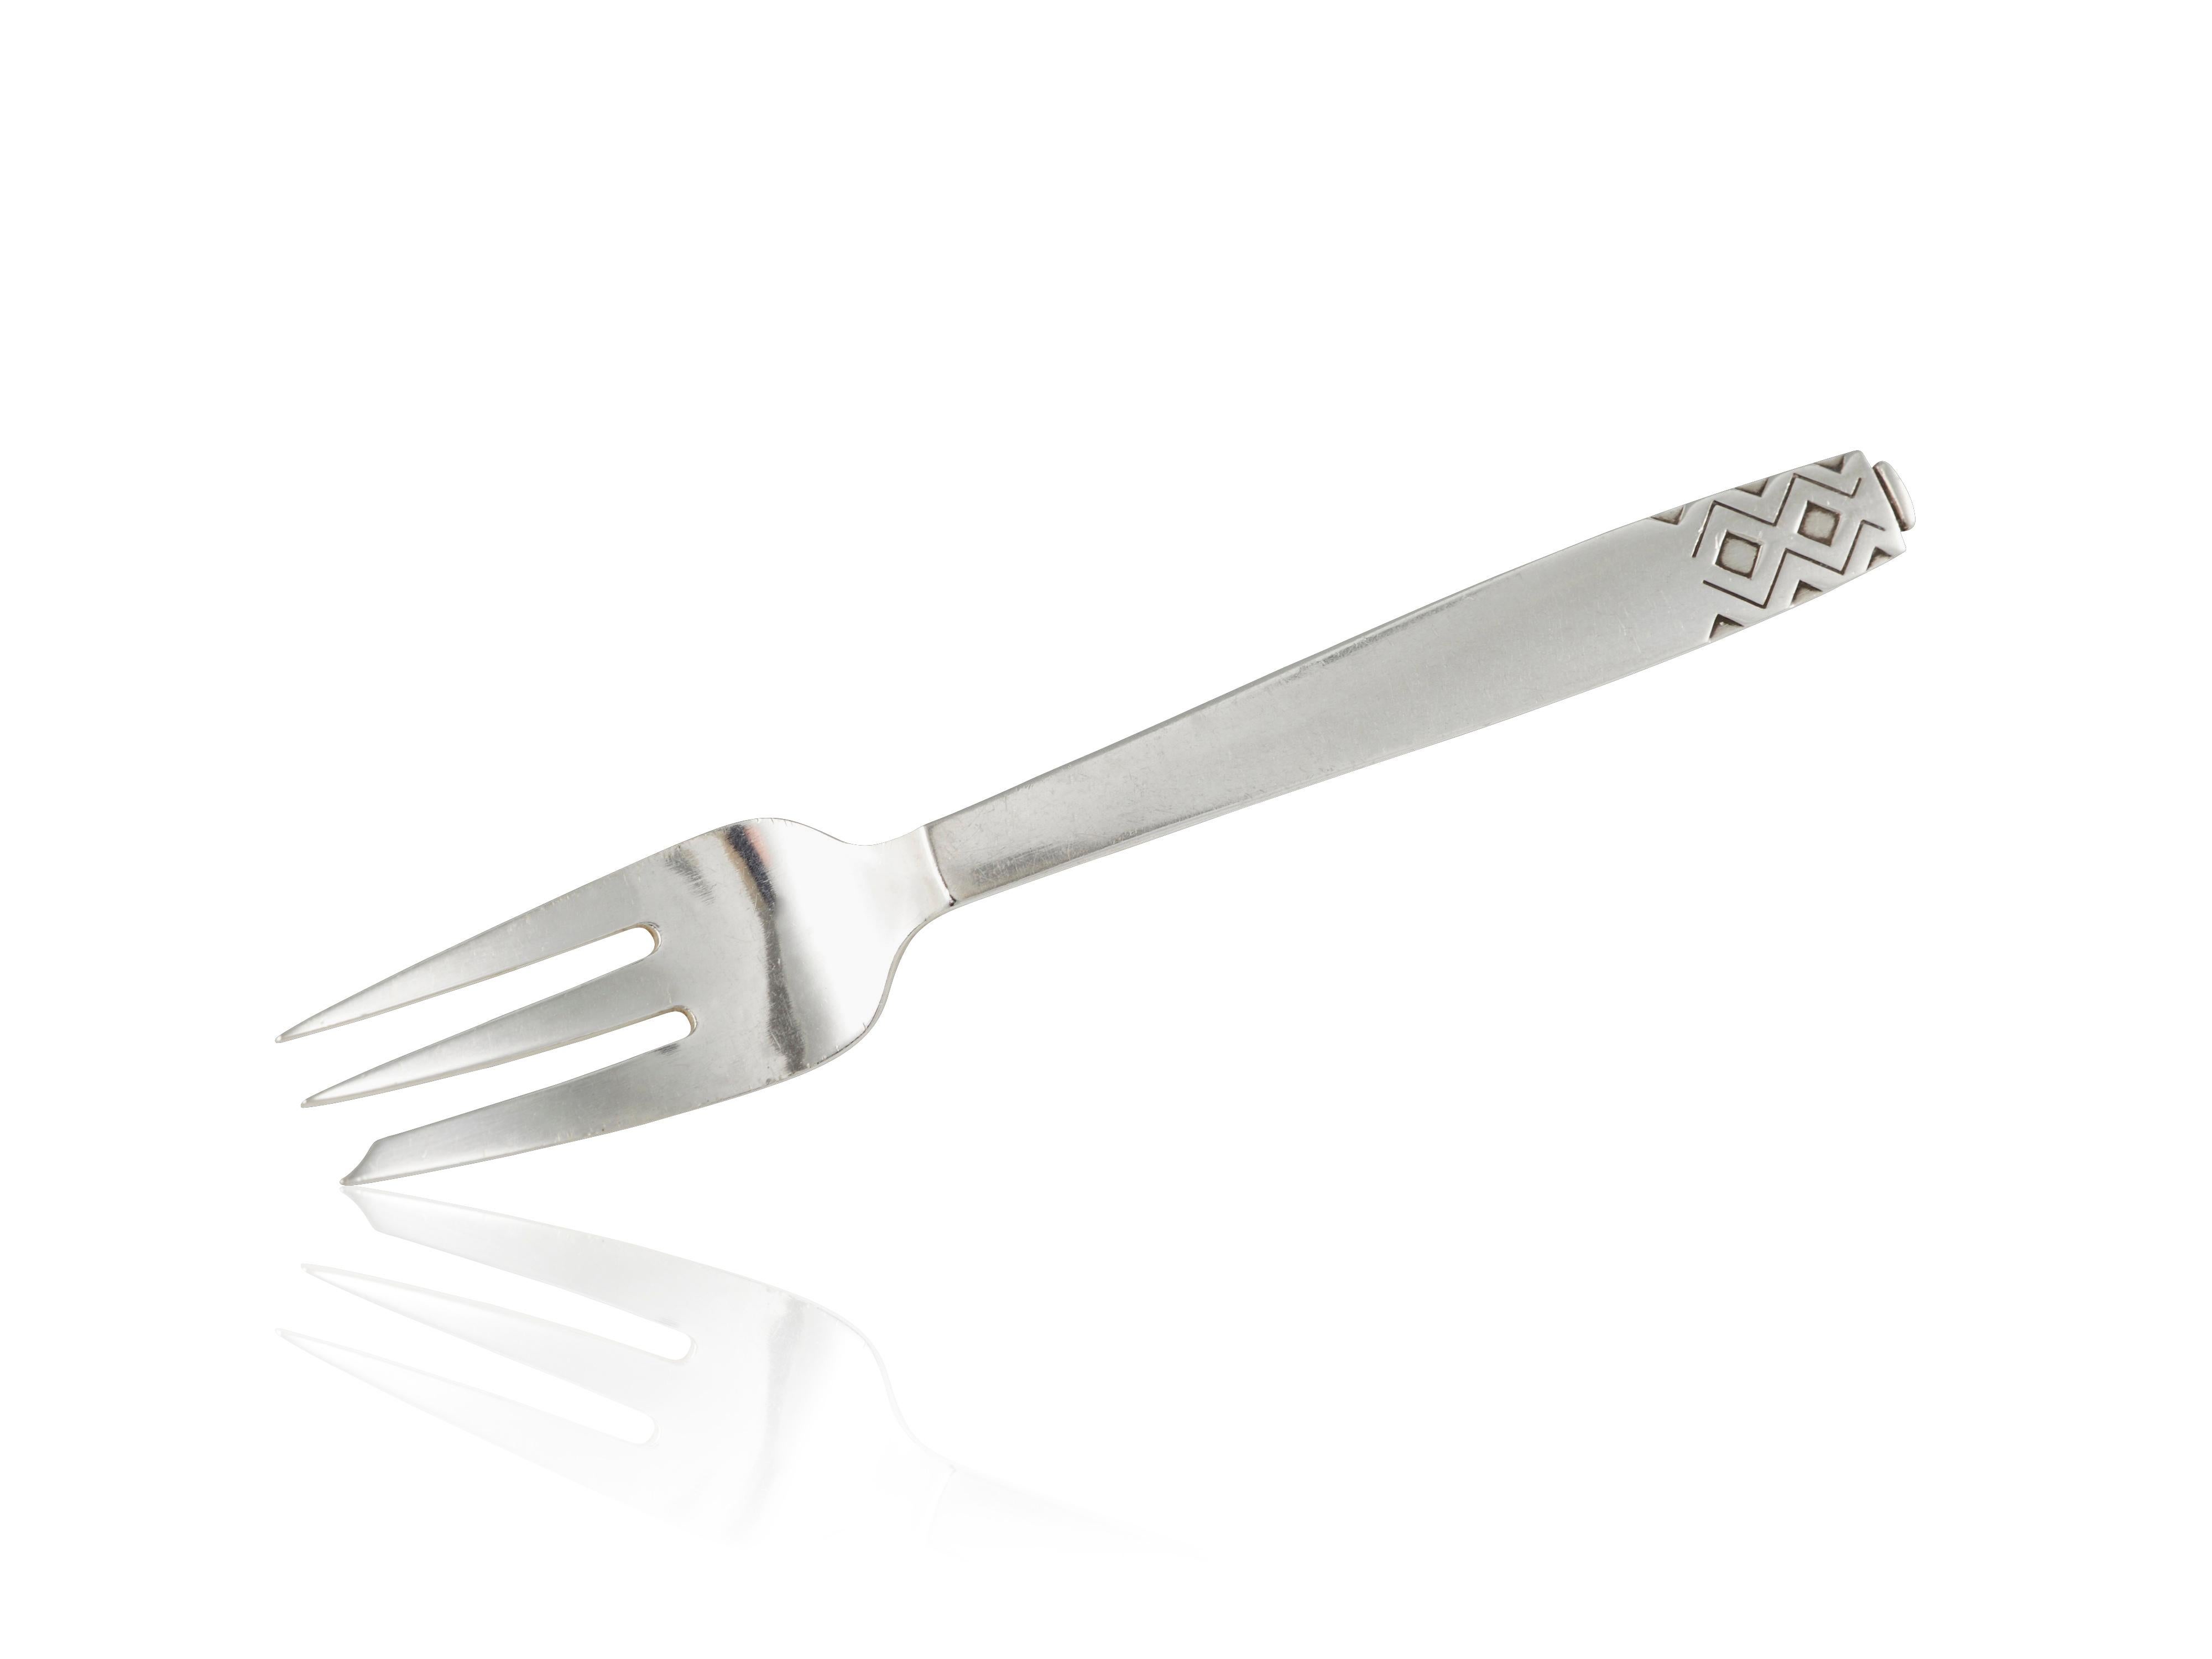 Sterling silver Georg Jensen pastry fork, item 043 in the Mayan Pattern, design #56 by Johan Rohde from 1937.

Additional information:
Material: Sterling silver
Styles: Art Deco
Hallmarks: With Georg Jensen hallmark, made in Denmark.
Dimensions: